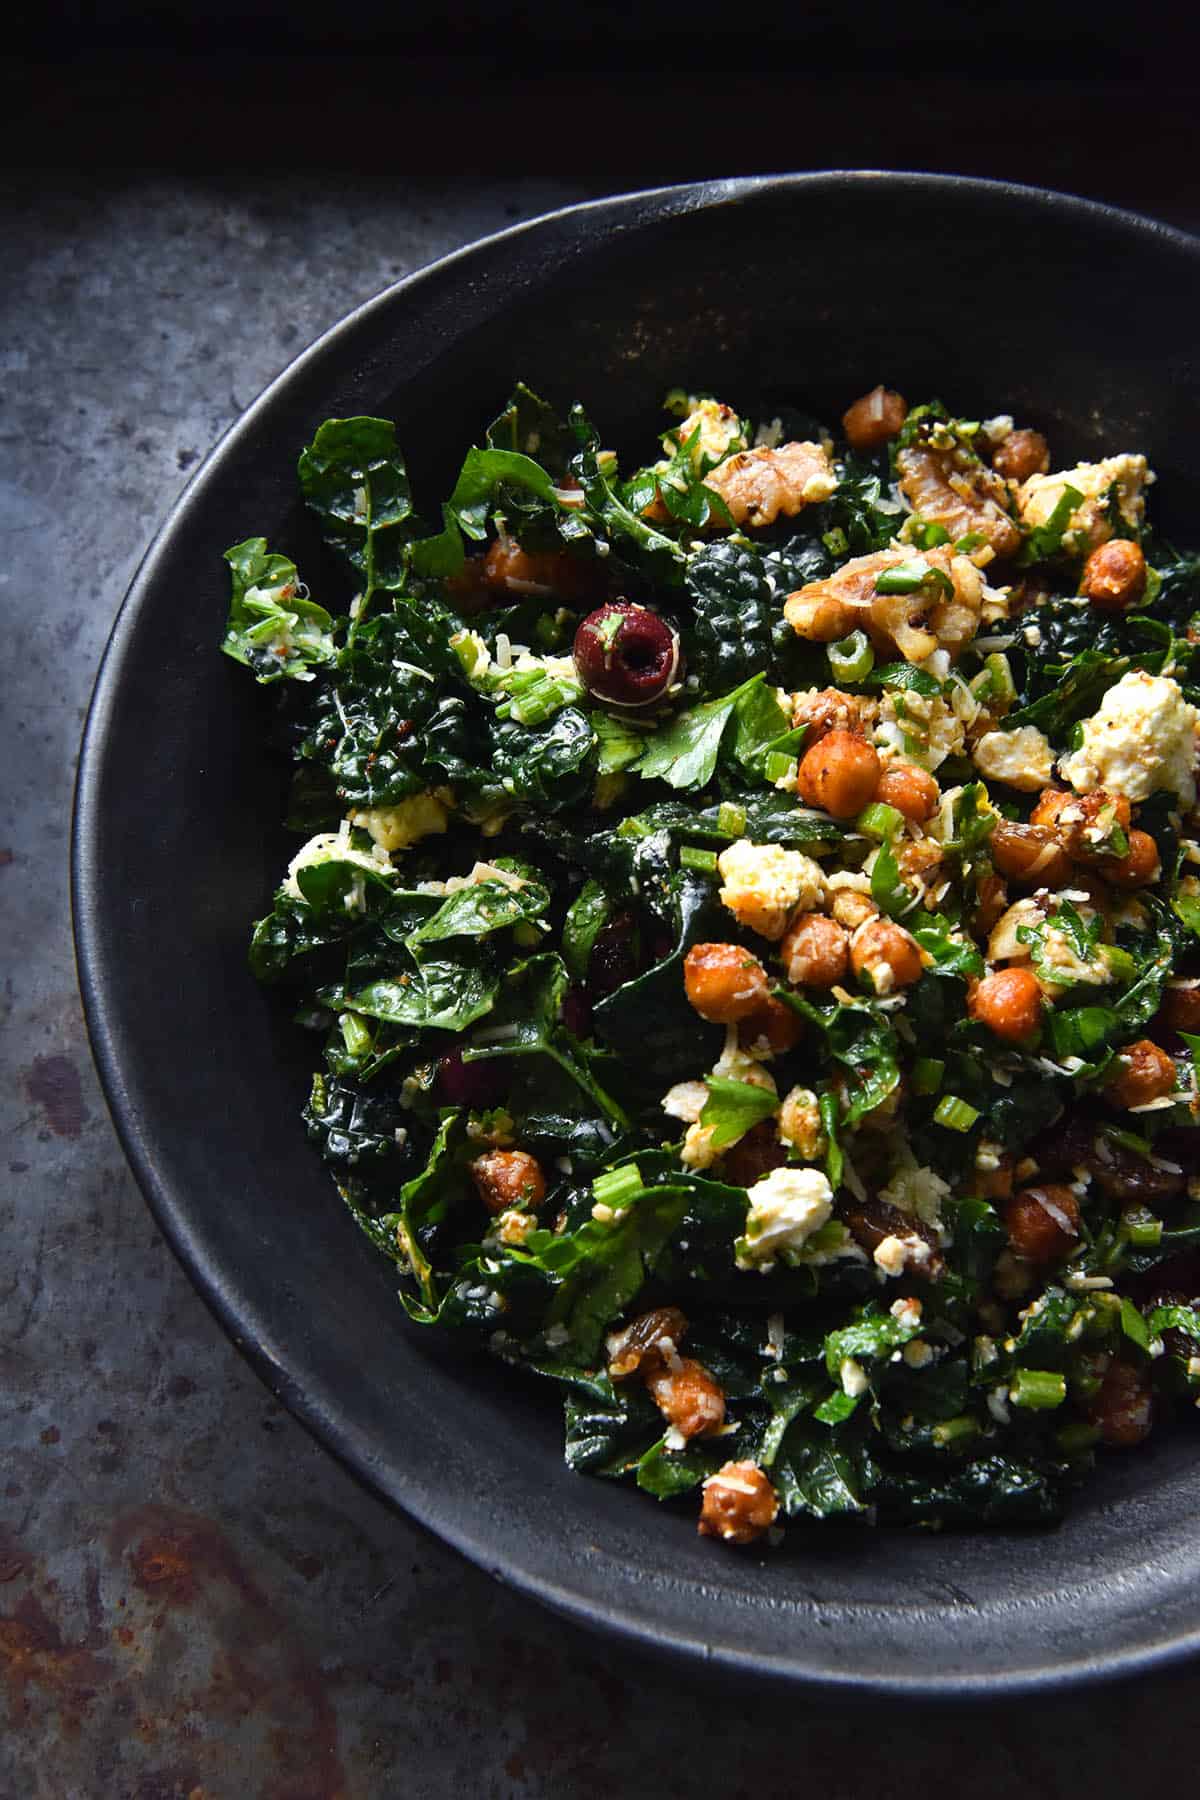 A darker image of a dark grey ceramic bowl filled with a crispy chickpea, kale, feta and raisin salad. The salad sits piled high in the bowl, which sits atop a dark grey mottled backdrop.